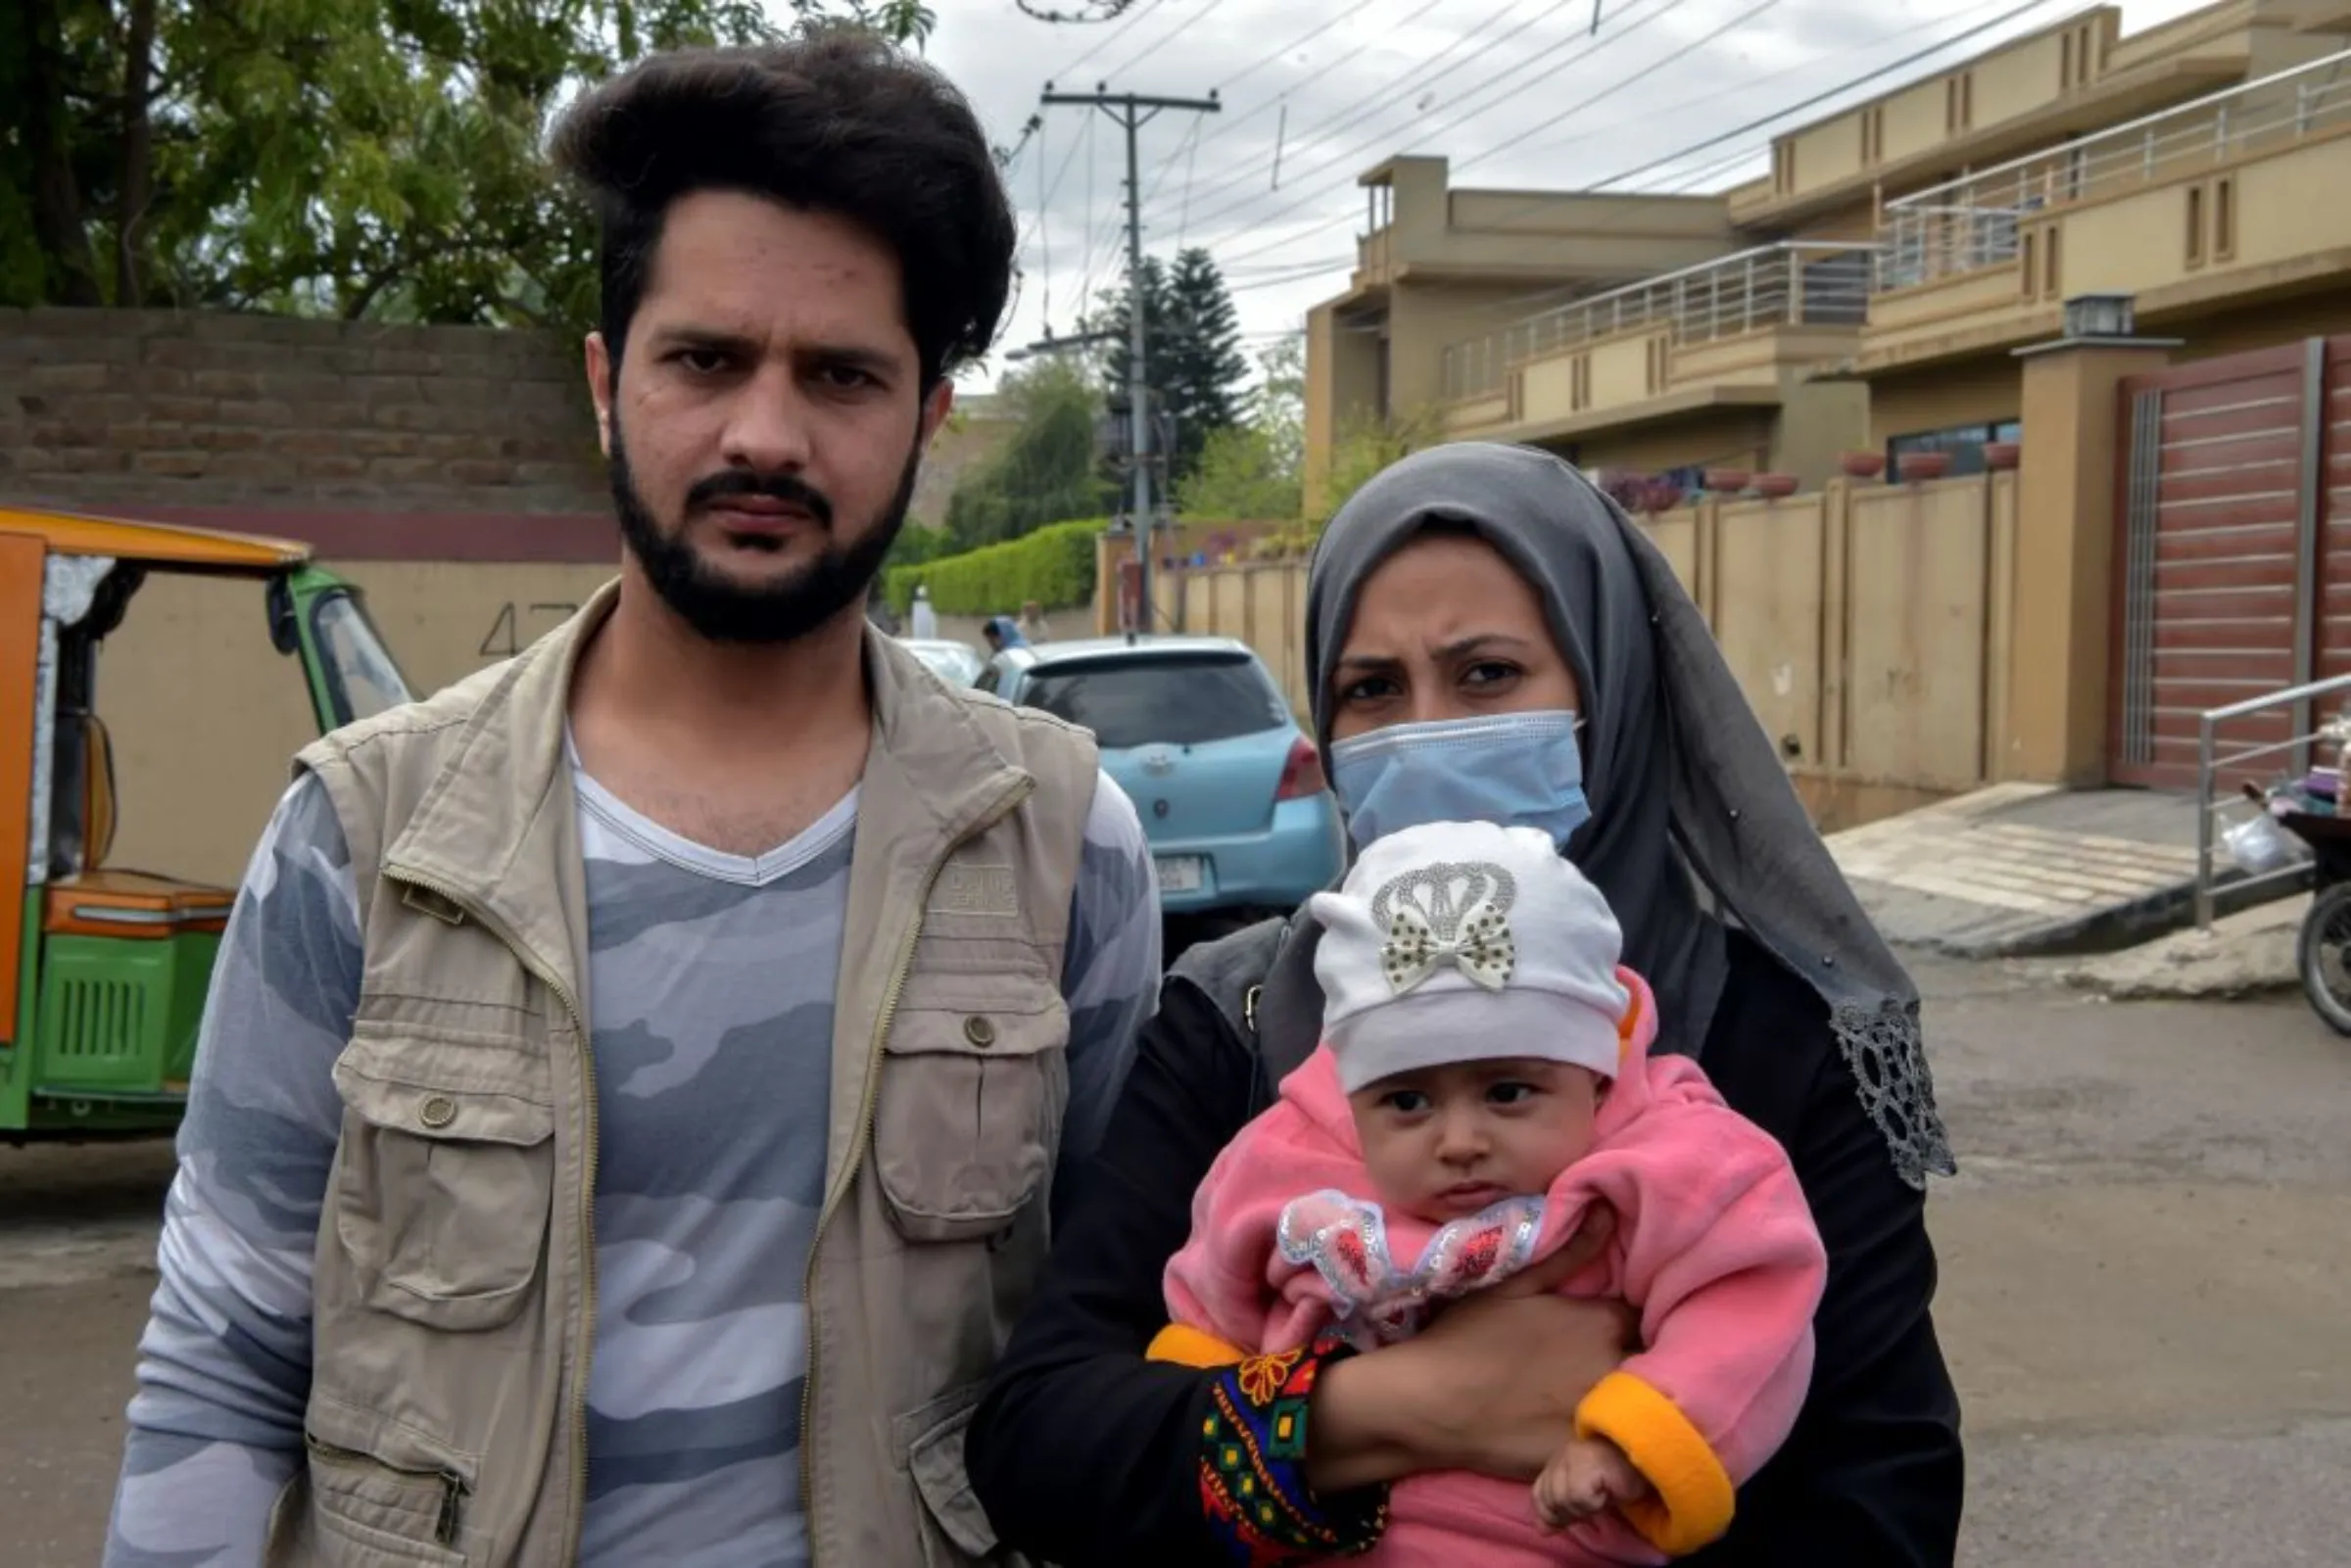 Afghan refugees, Samiullah Ahmadi and Lutfia Ahmadi, pose for a photo with their baby in Peshawar, Pakistan on March 8, 2022